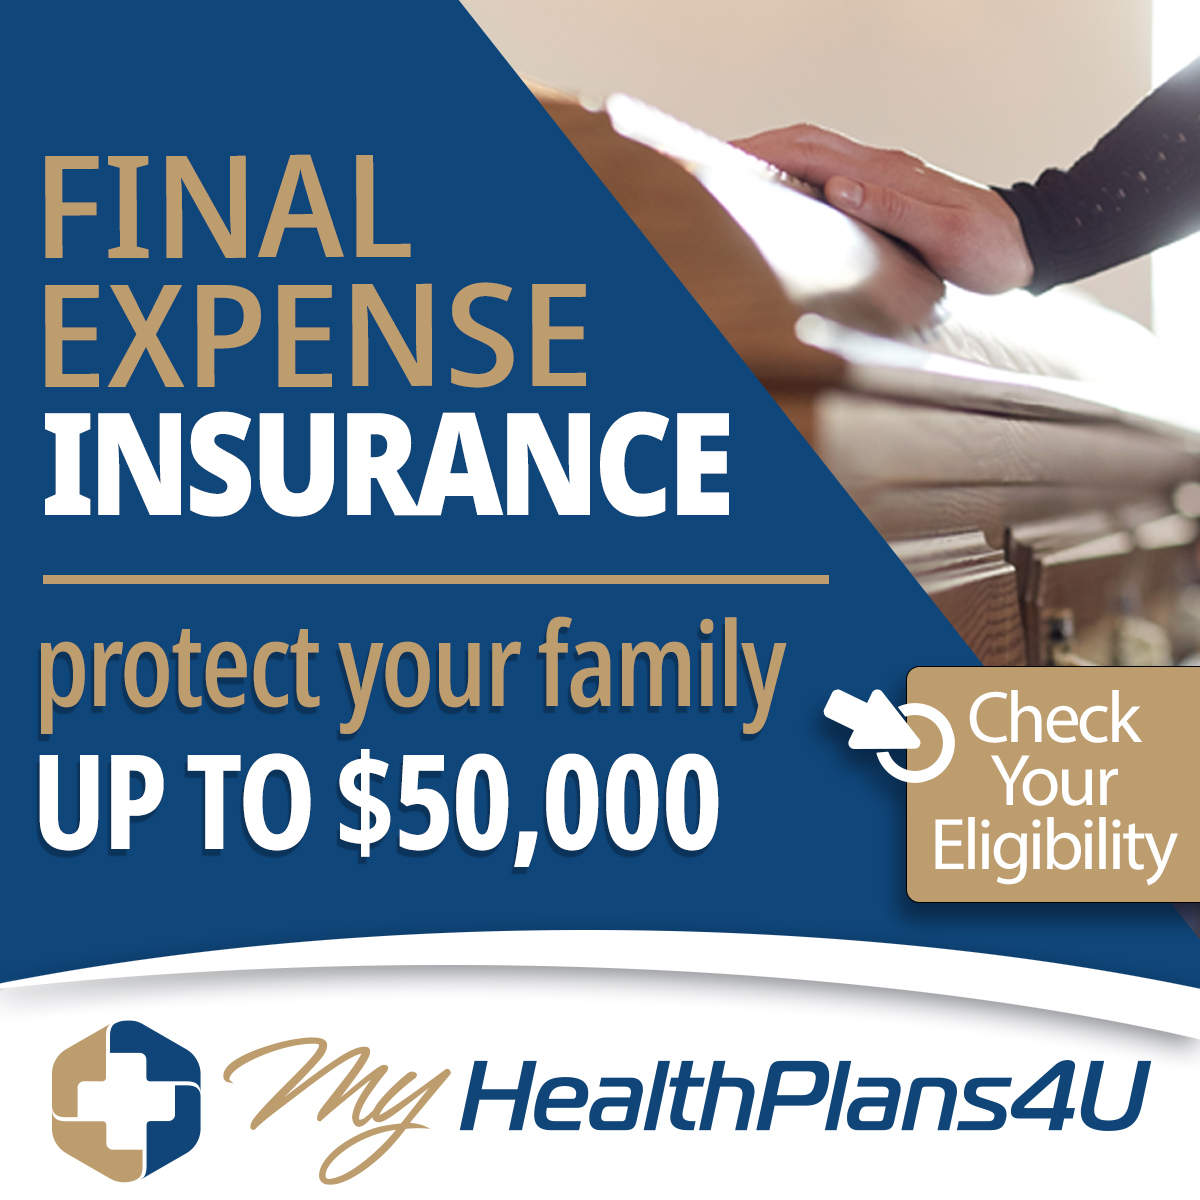 Final Expense Insurance, protect your family, up to $50,000. Check your eligibility. My Health Plans four you.